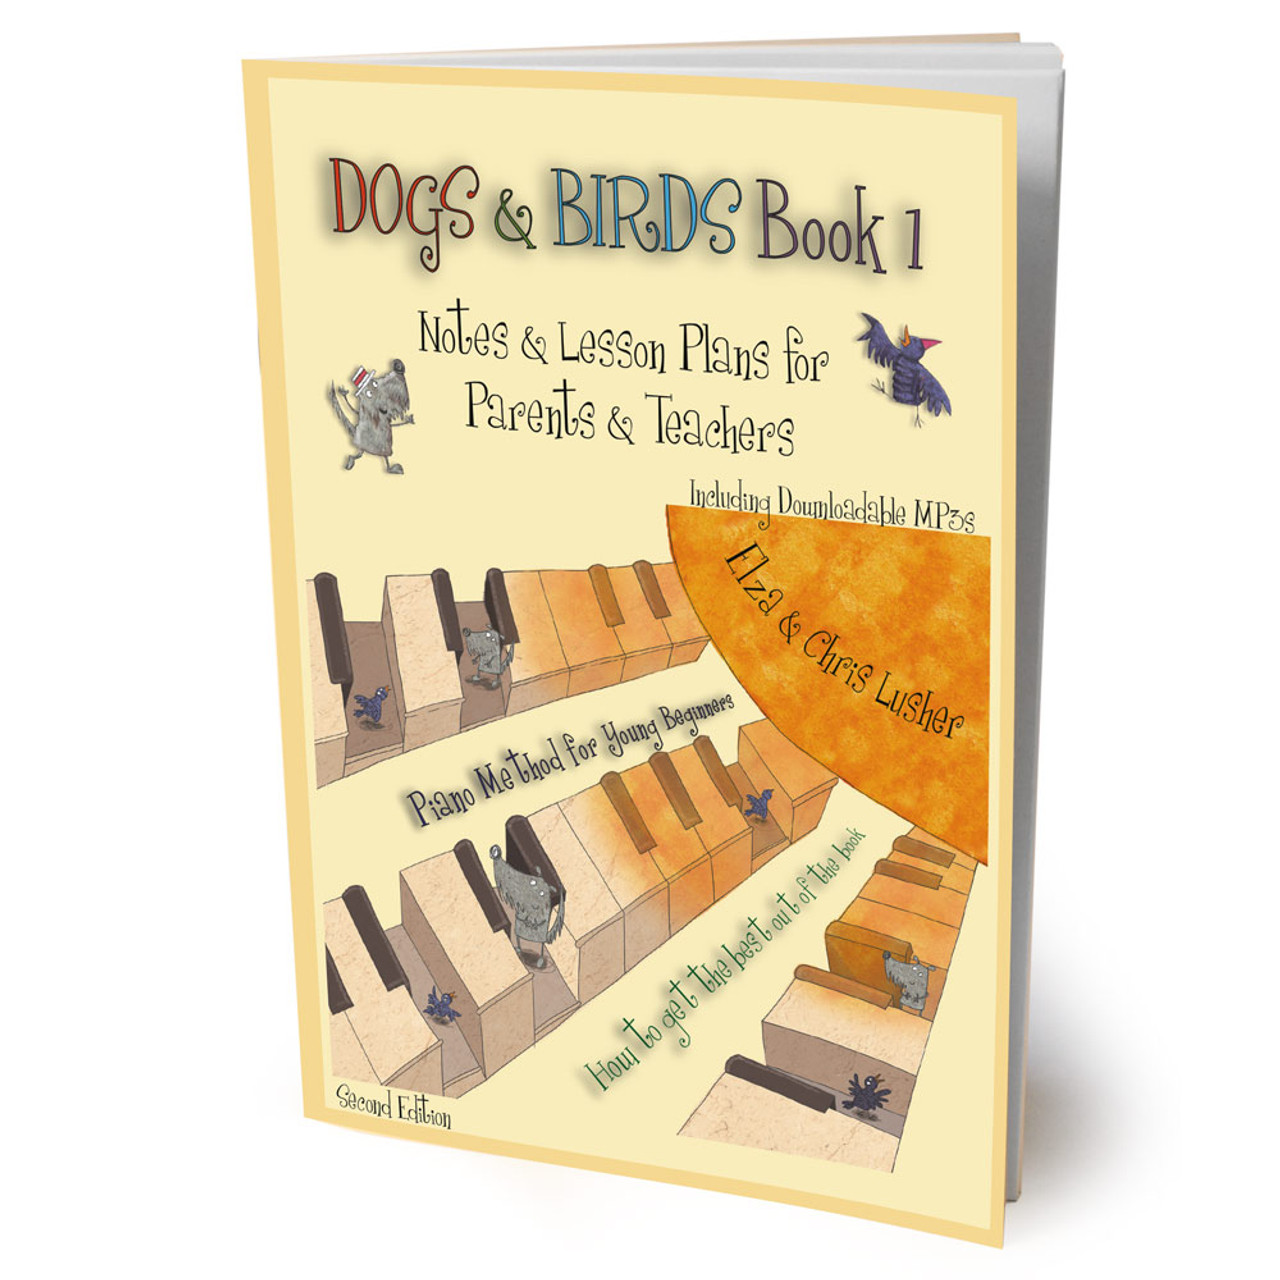 Plans　and　to　and　Birds　Edition　Book　Lesson　Second　Notes　Teachers,　Parents　and　for　Dogs